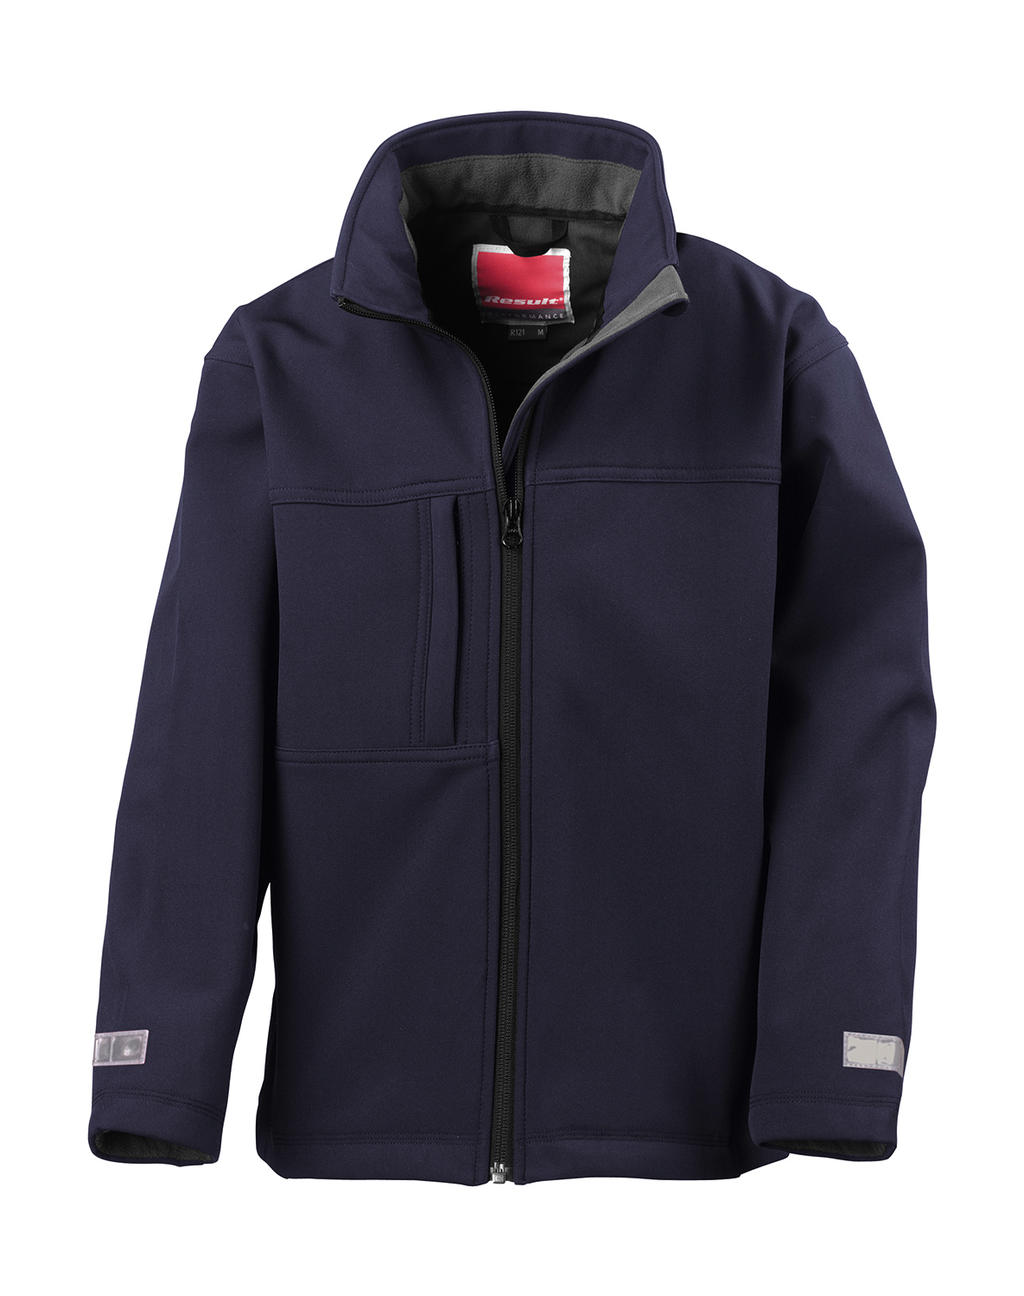  Junior/Youth Classic Soft Shell in Farbe Navy